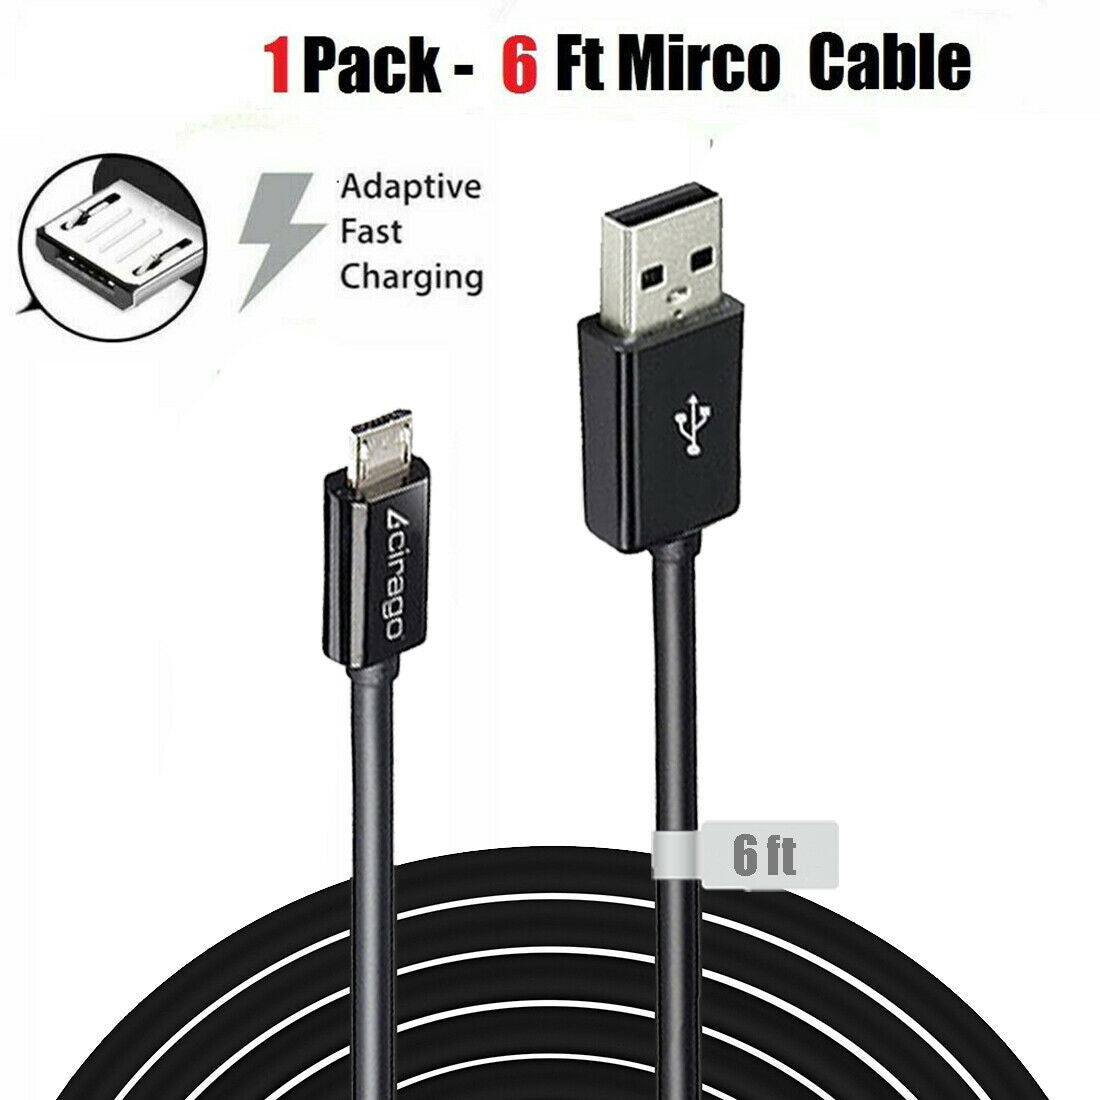 Cirago Universal 6ft USB to Micro USB Male Data Sync/Charging Cable for Samsung